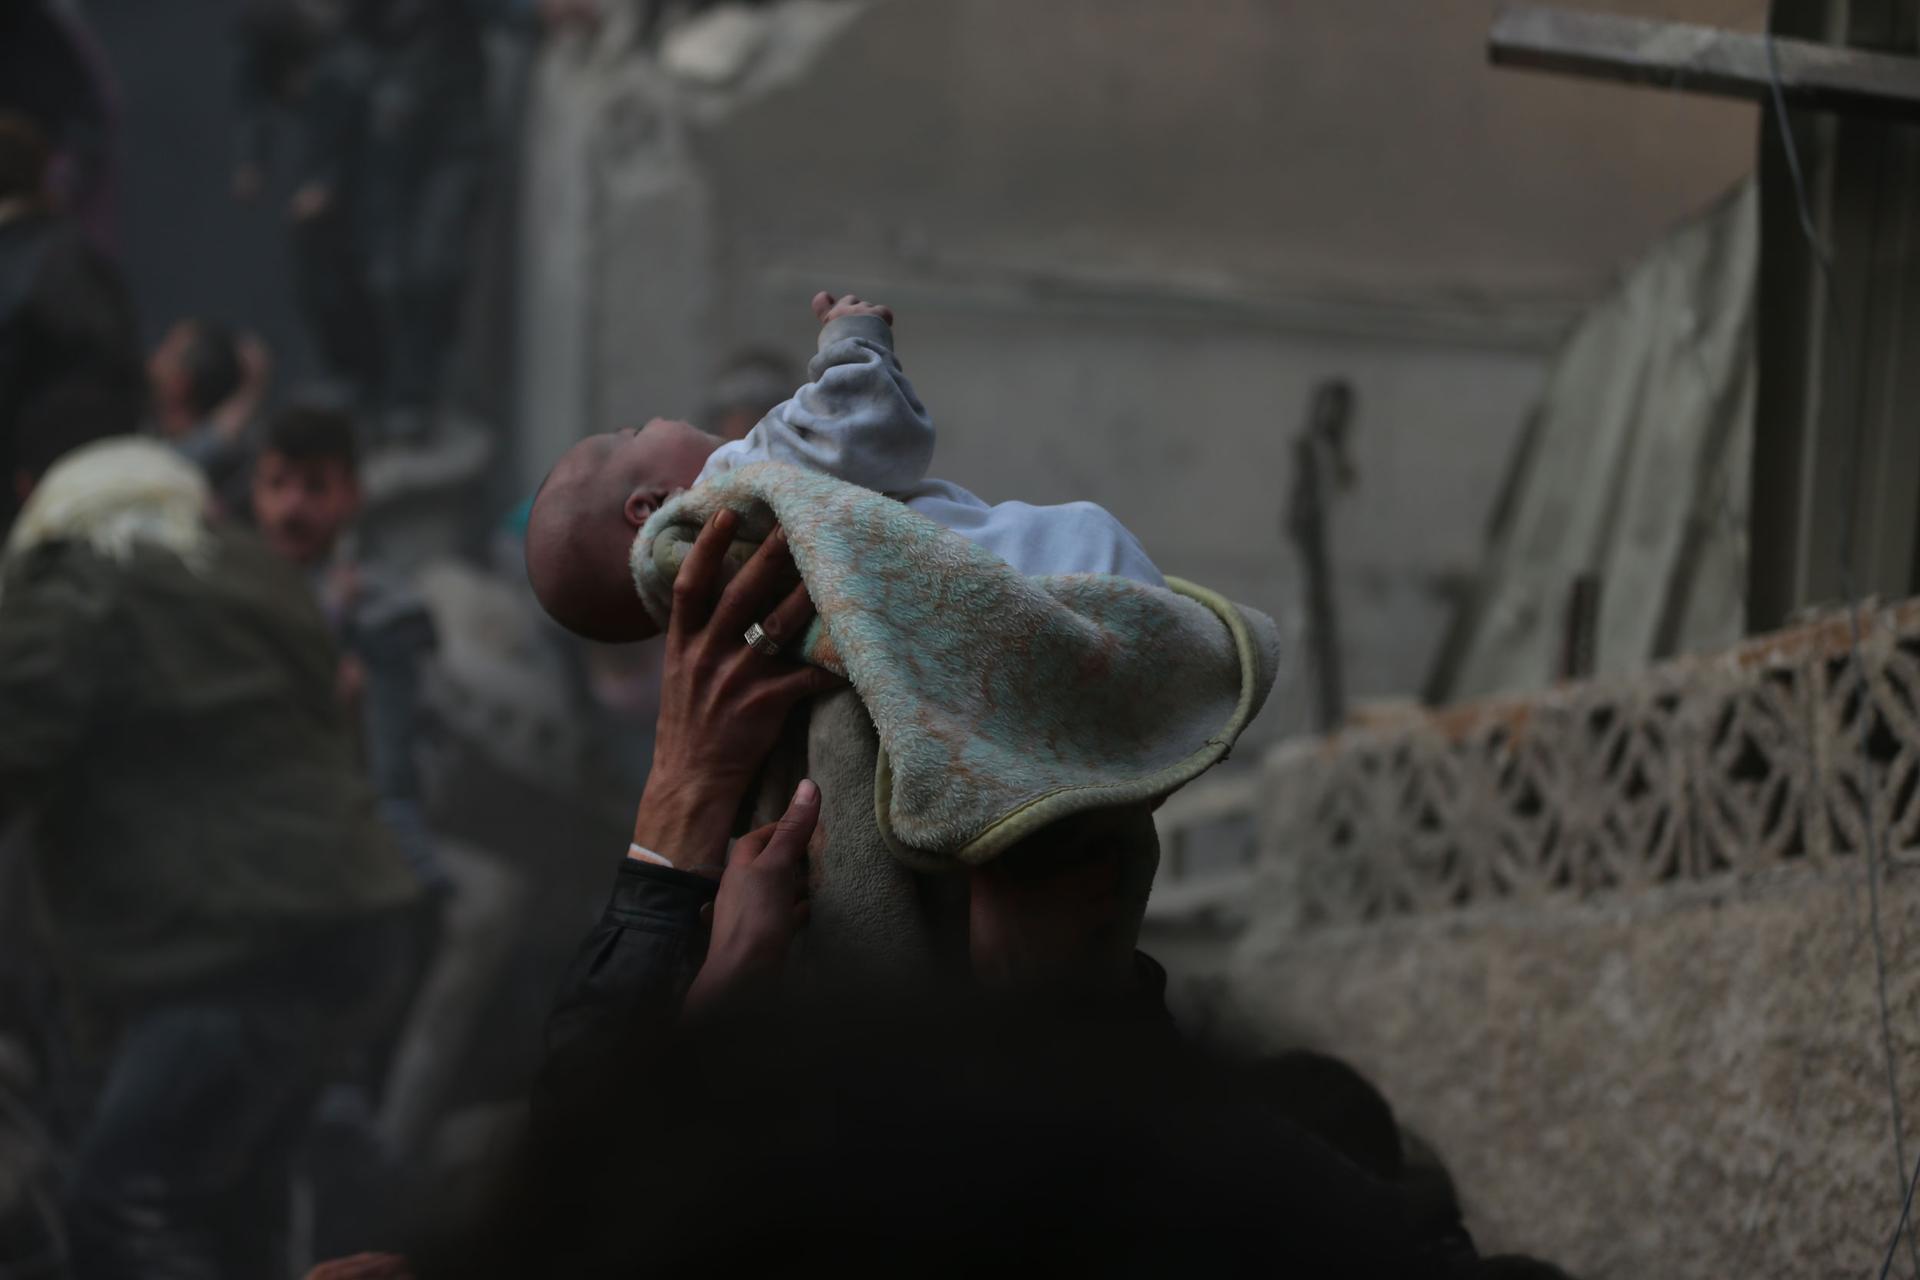 A small baby is shown wrapped in blanked and held above the heads people amid blackened walls of buildings.